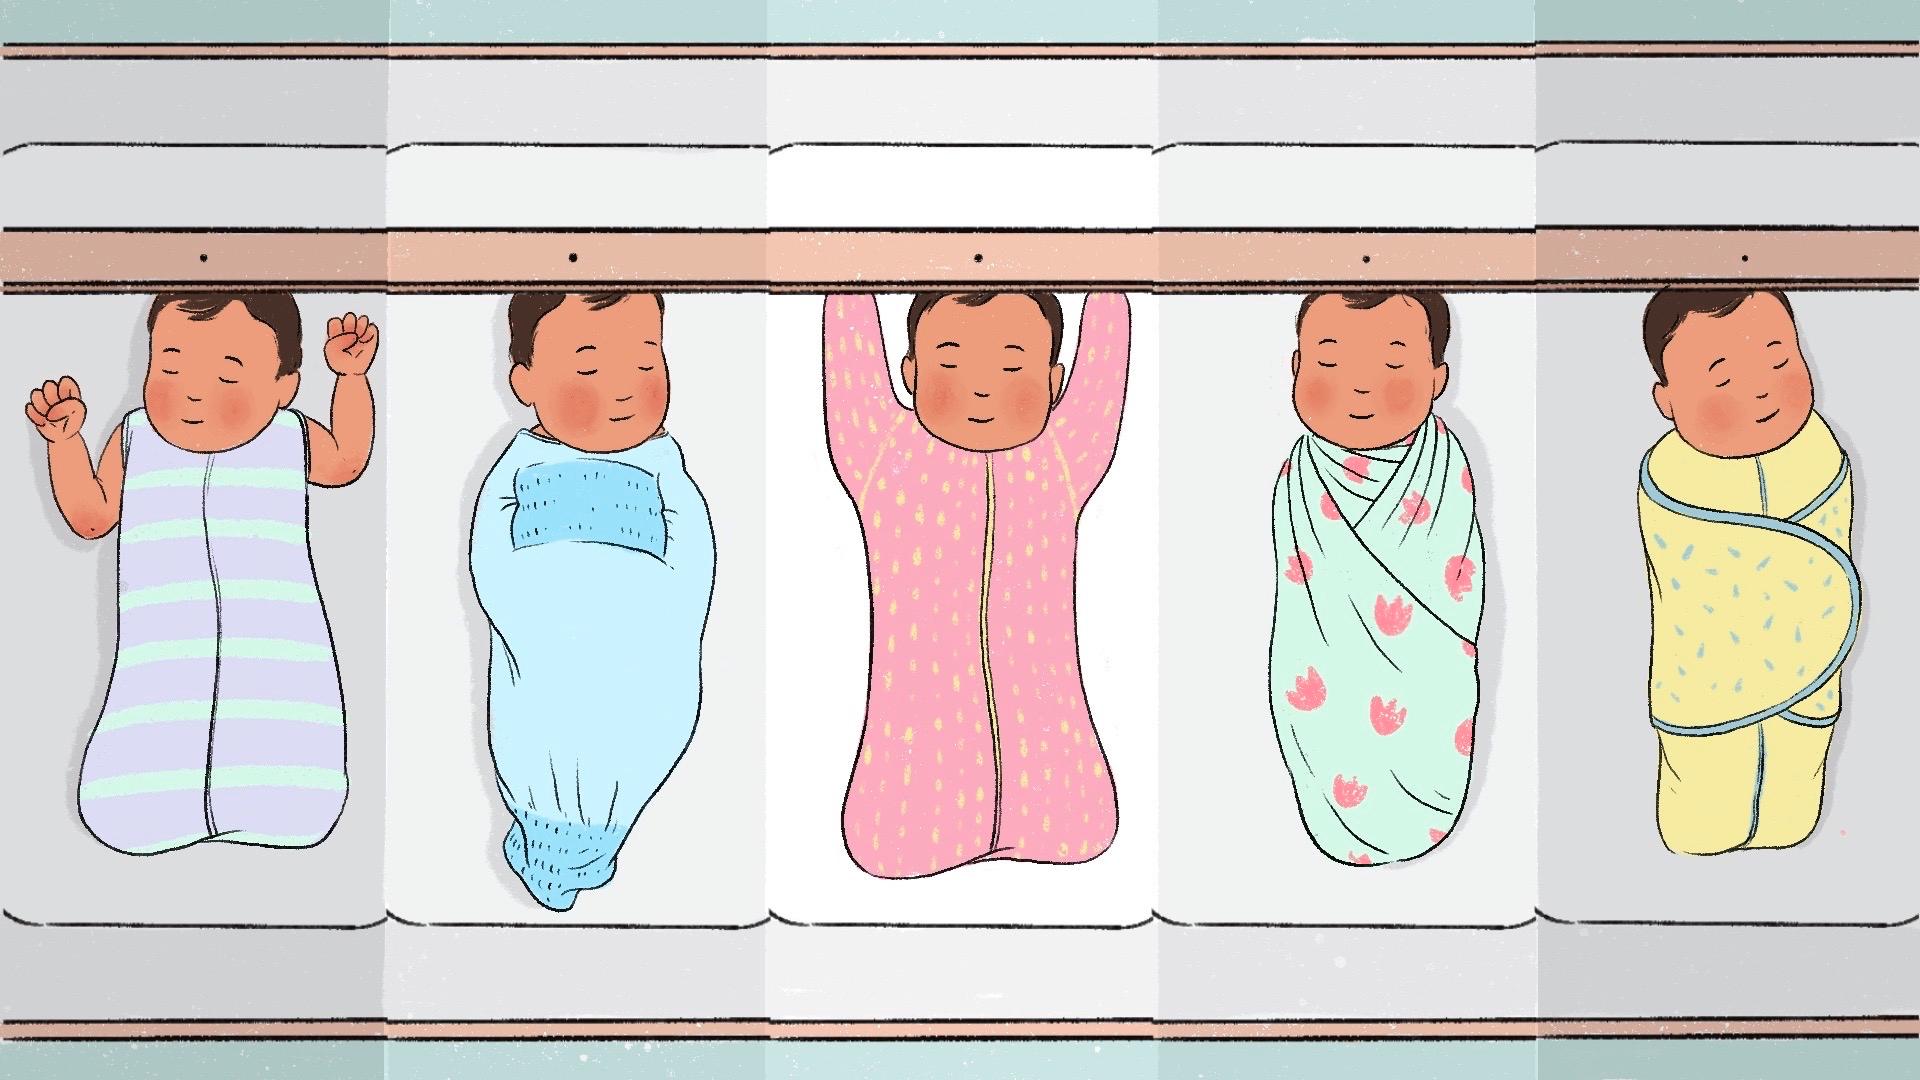 SO. MANY. SWADDLES. How can you choose the right one?